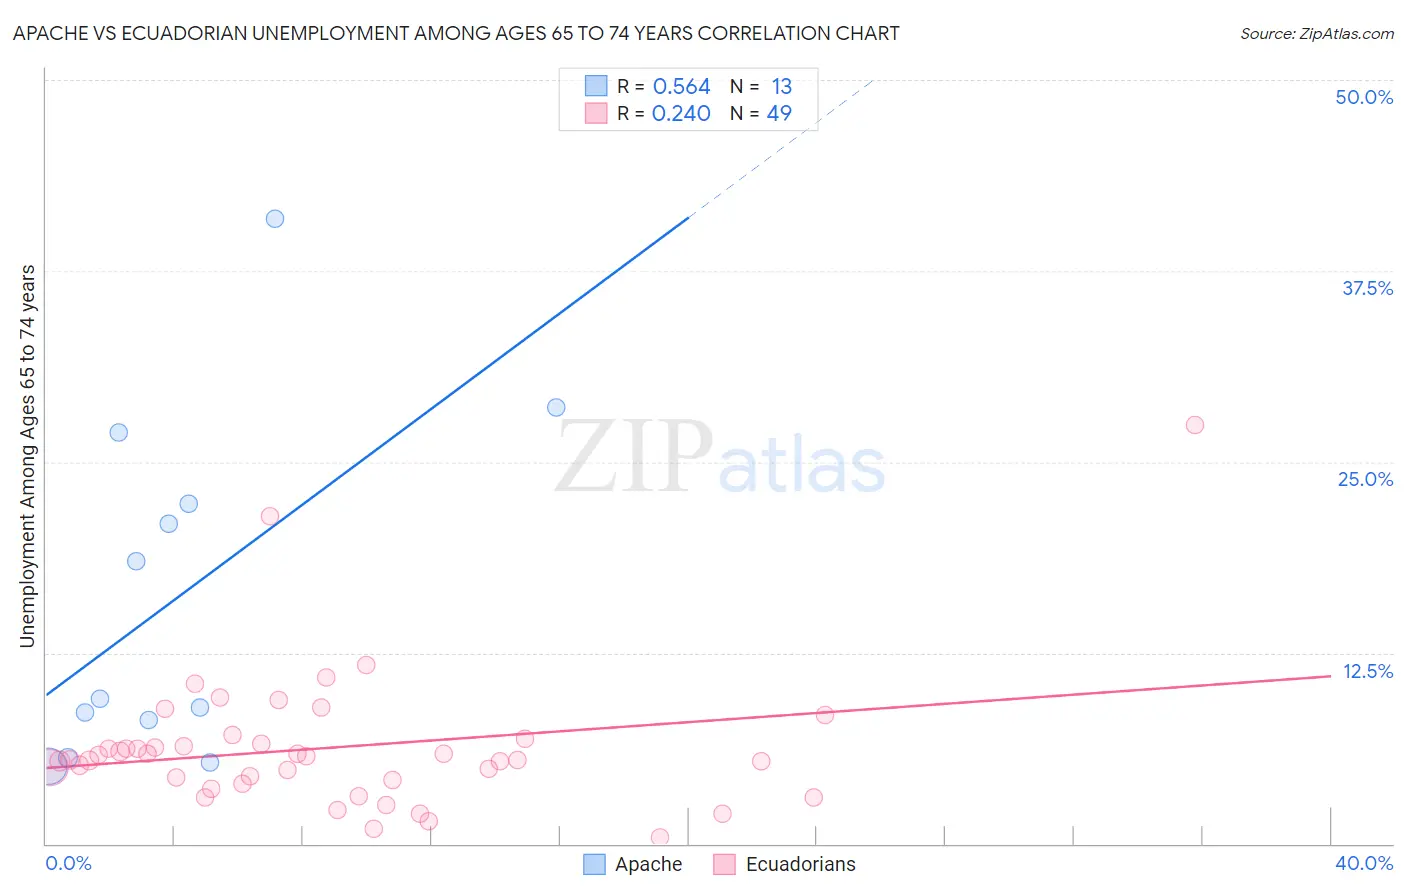 Apache vs Ecuadorian Unemployment Among Ages 65 to 74 years